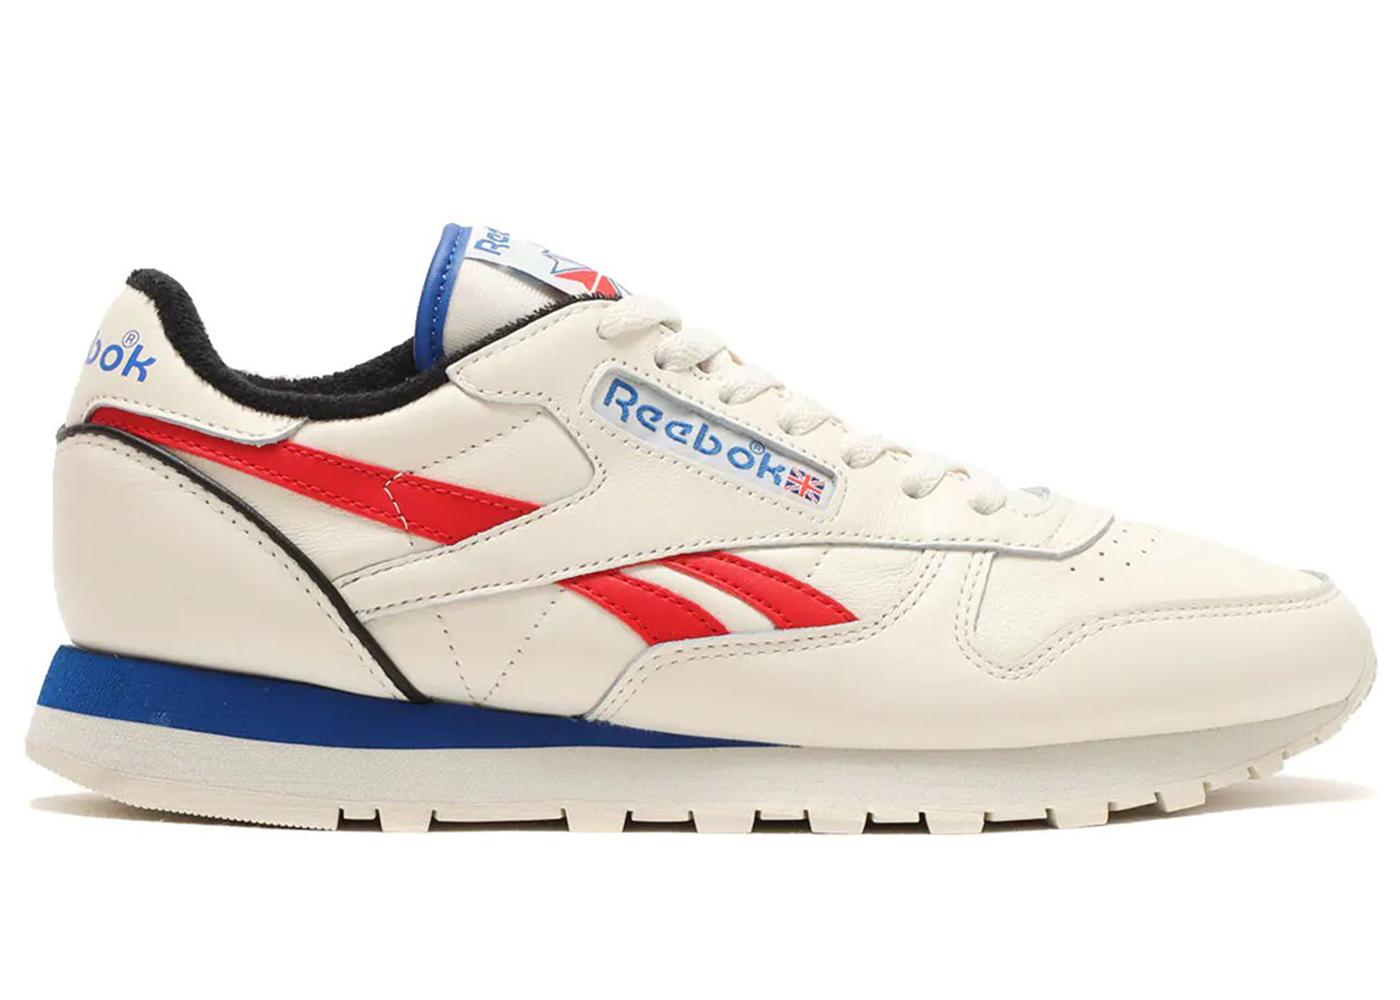 Buy Reebok Unisex-Adult Gl1000 Classic White/Vector Blue/Vector RED Sneaker  - 6 UK (LVH71) at Amazon.in